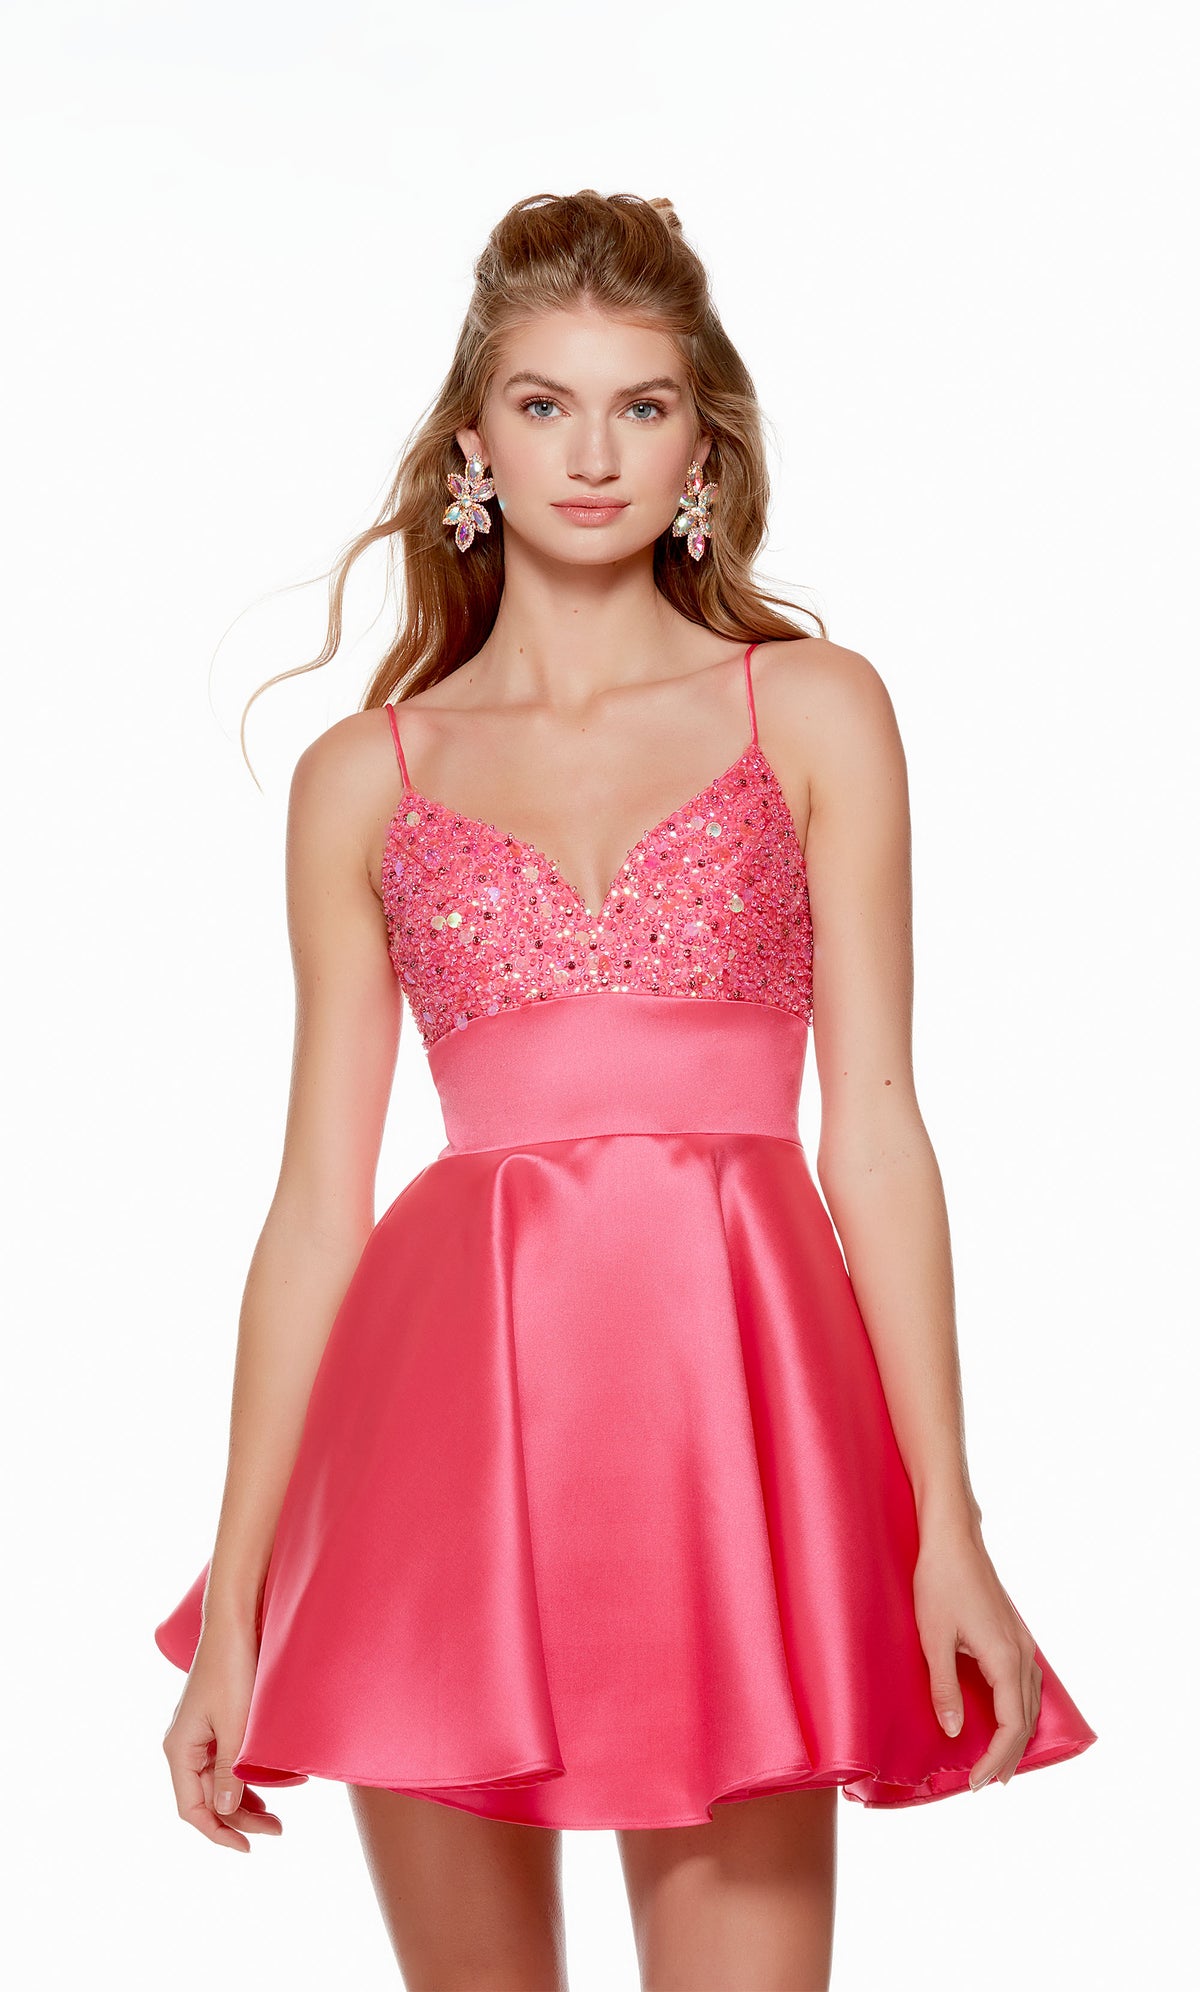 A playful hot pink homecoming dress, featuring a soft V neckline, an open V shaped back, and a flared skirt. The top of the dress is embellished with iridescent beads for a touch of sparkle.